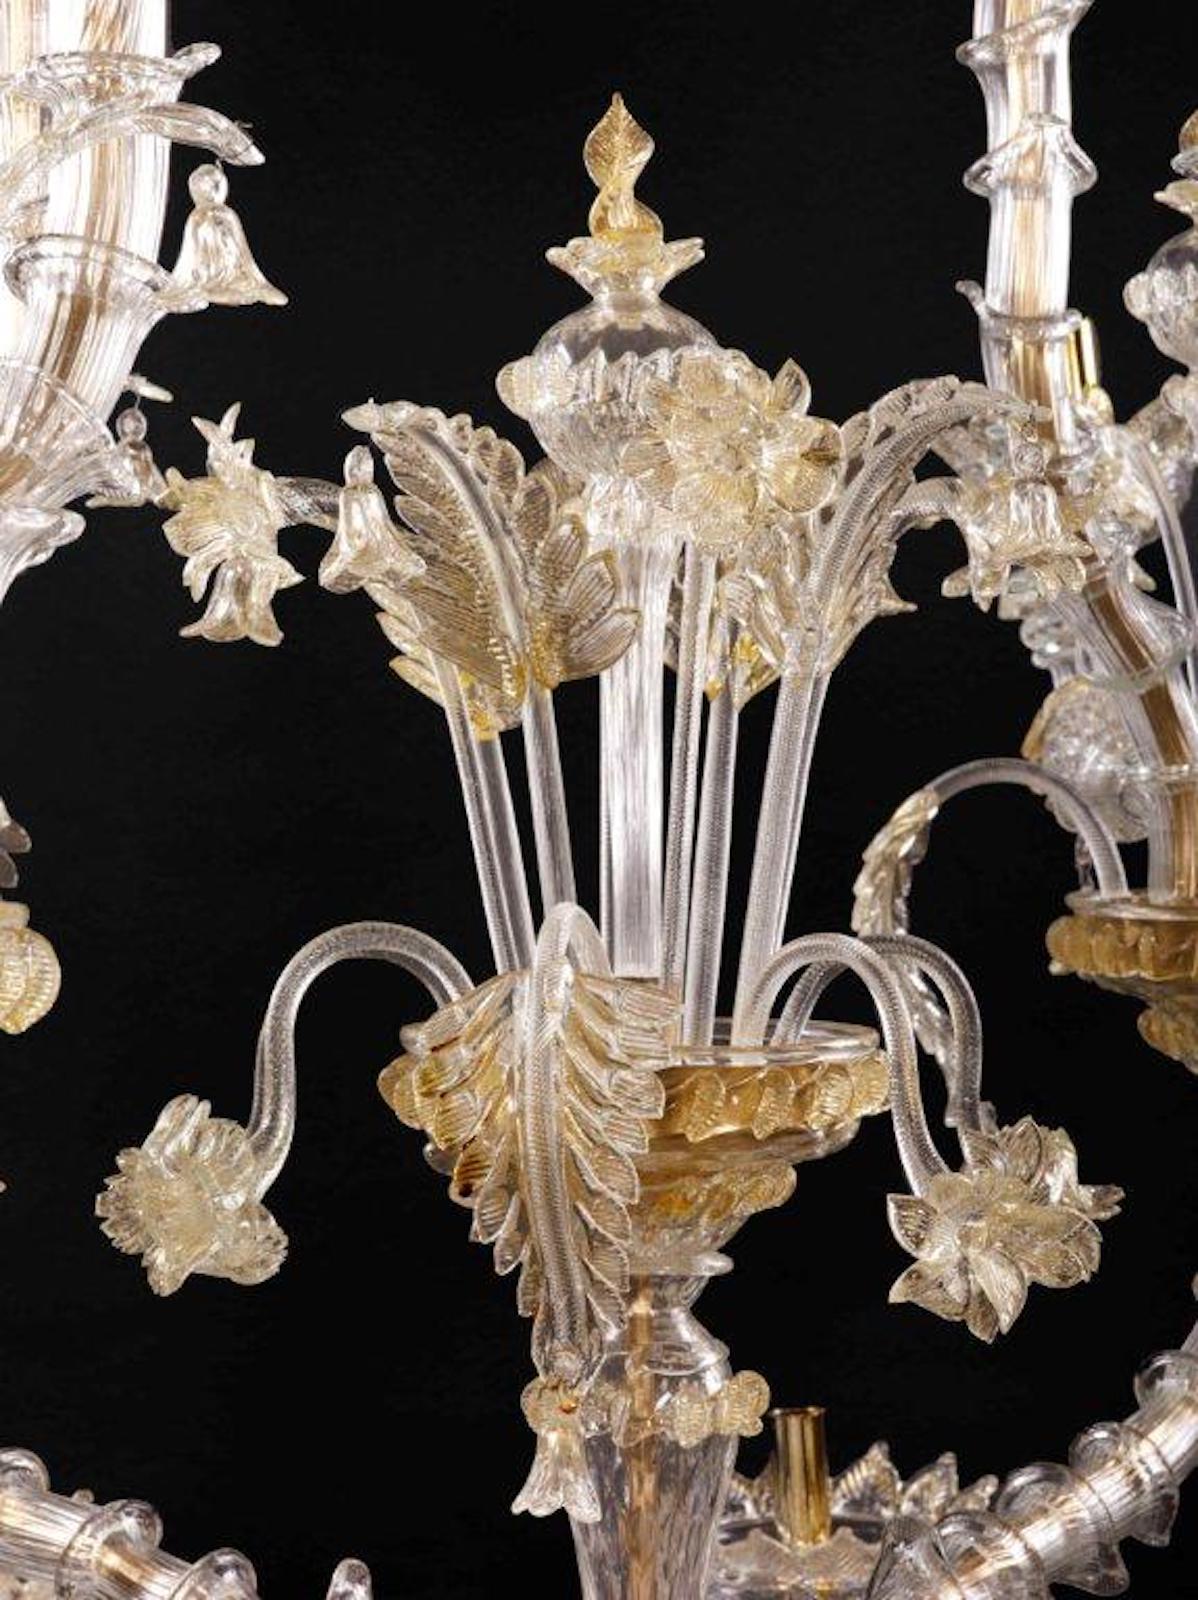 Chandelier Rezzonico in artistic glass entirely mottled with gold leaf.
The artwork is designed in antique baroque and Rococò Venetian, classic Venetian Rezzonico that enriches any interior room with elegance; Ideal for large rooms, palace, hole